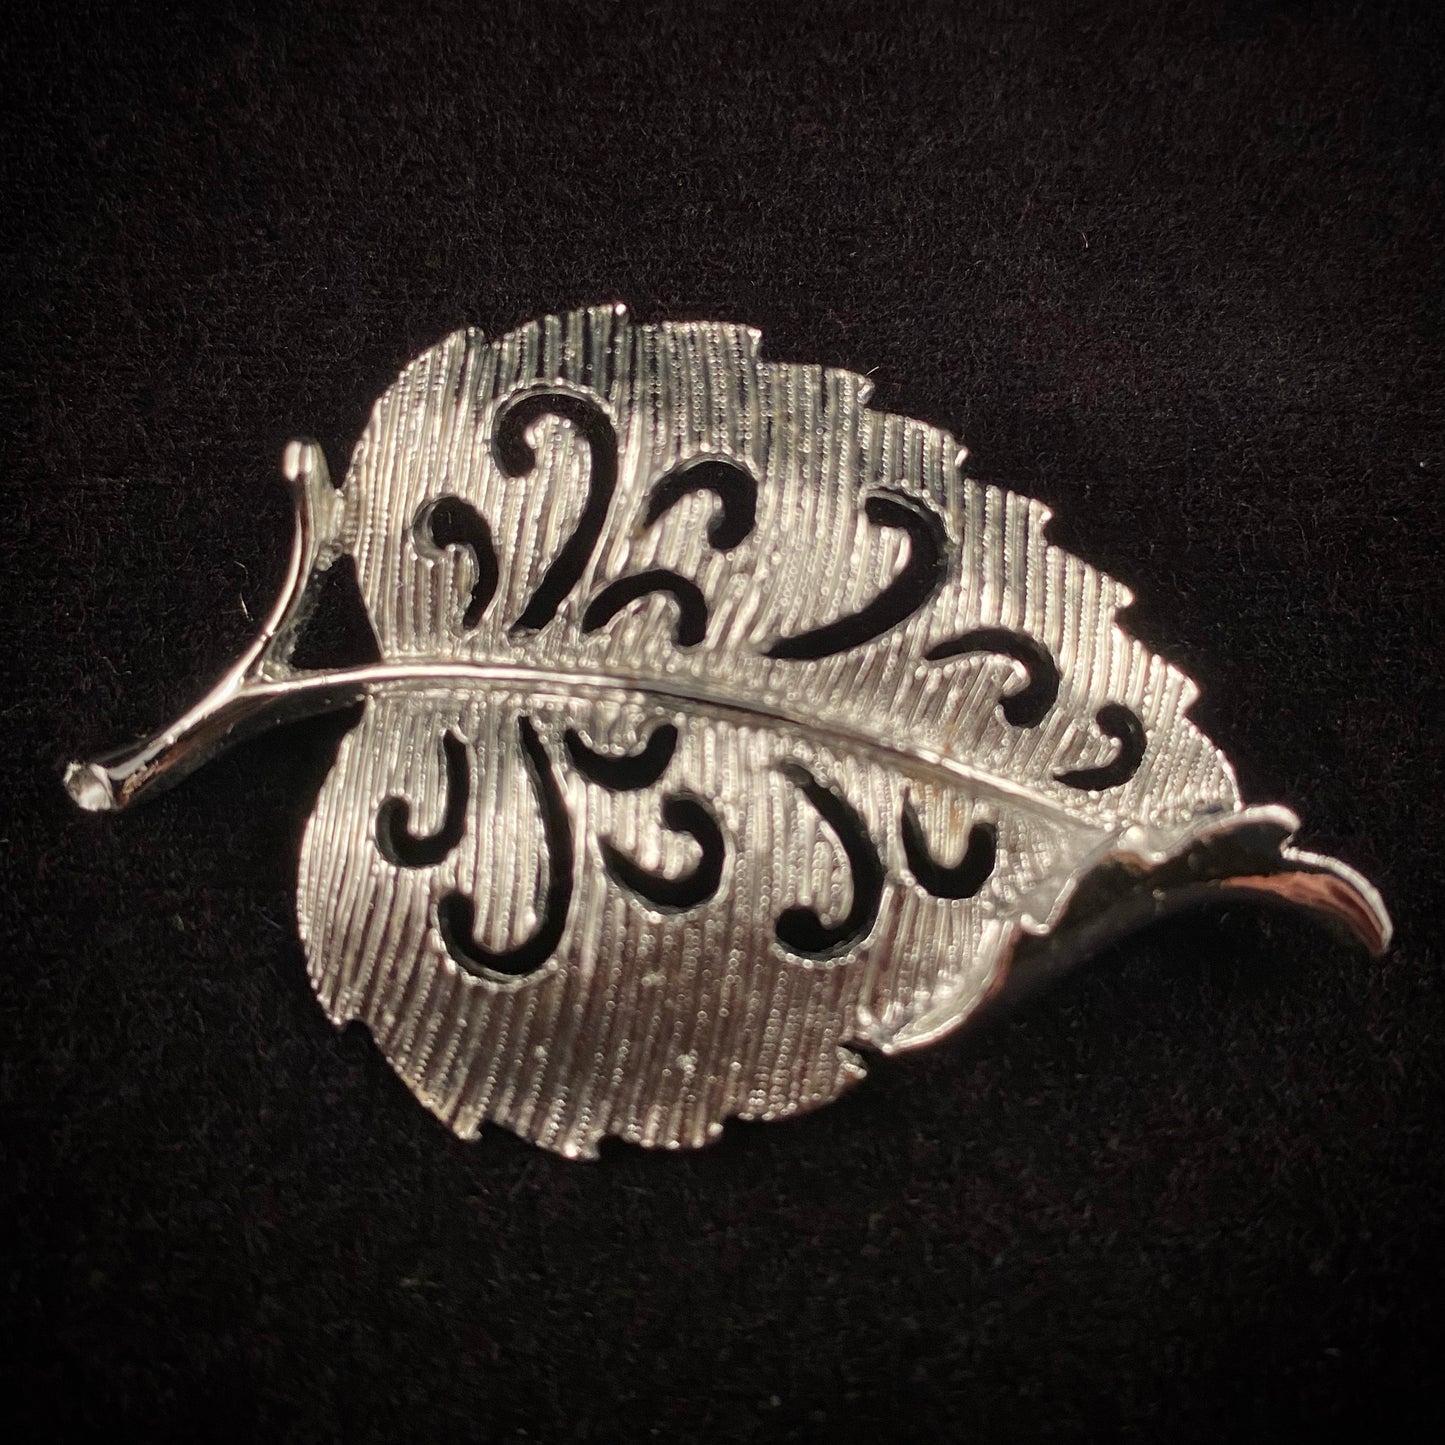 Late 50s/ Early 60s Gerry's Silver Leaf Brooch - Retro Kandy Vintage